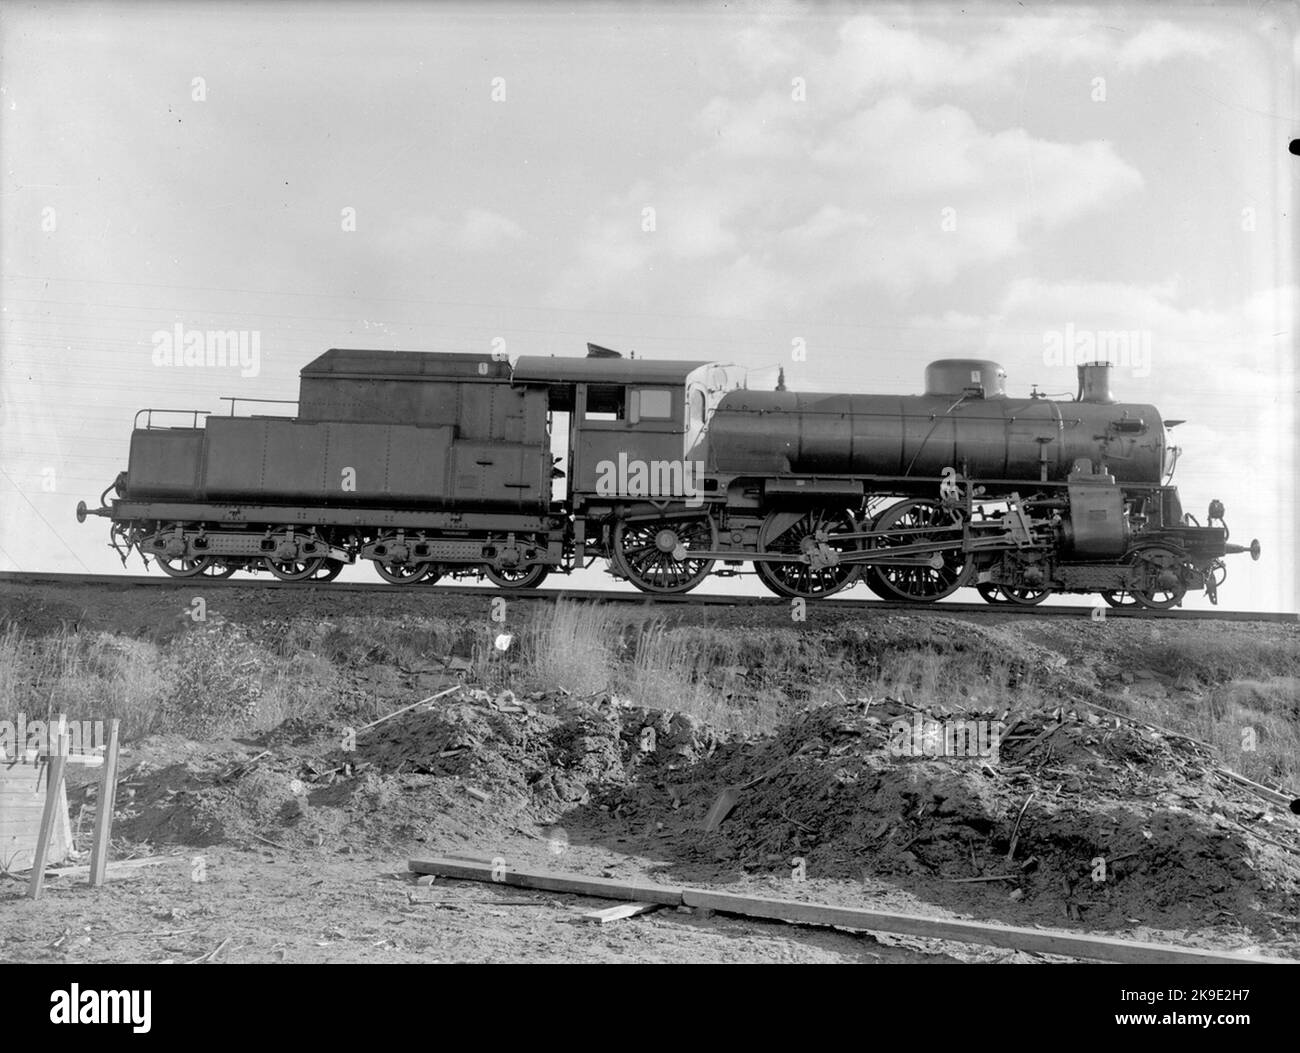 BJ B3 129. Delivery photo. The locomotive was manufactured in 1919 by wagon and the Maskinfabriksaktiebolaget in Falun, manufacturing number 129. Scrapped in 1960. Stock Photo